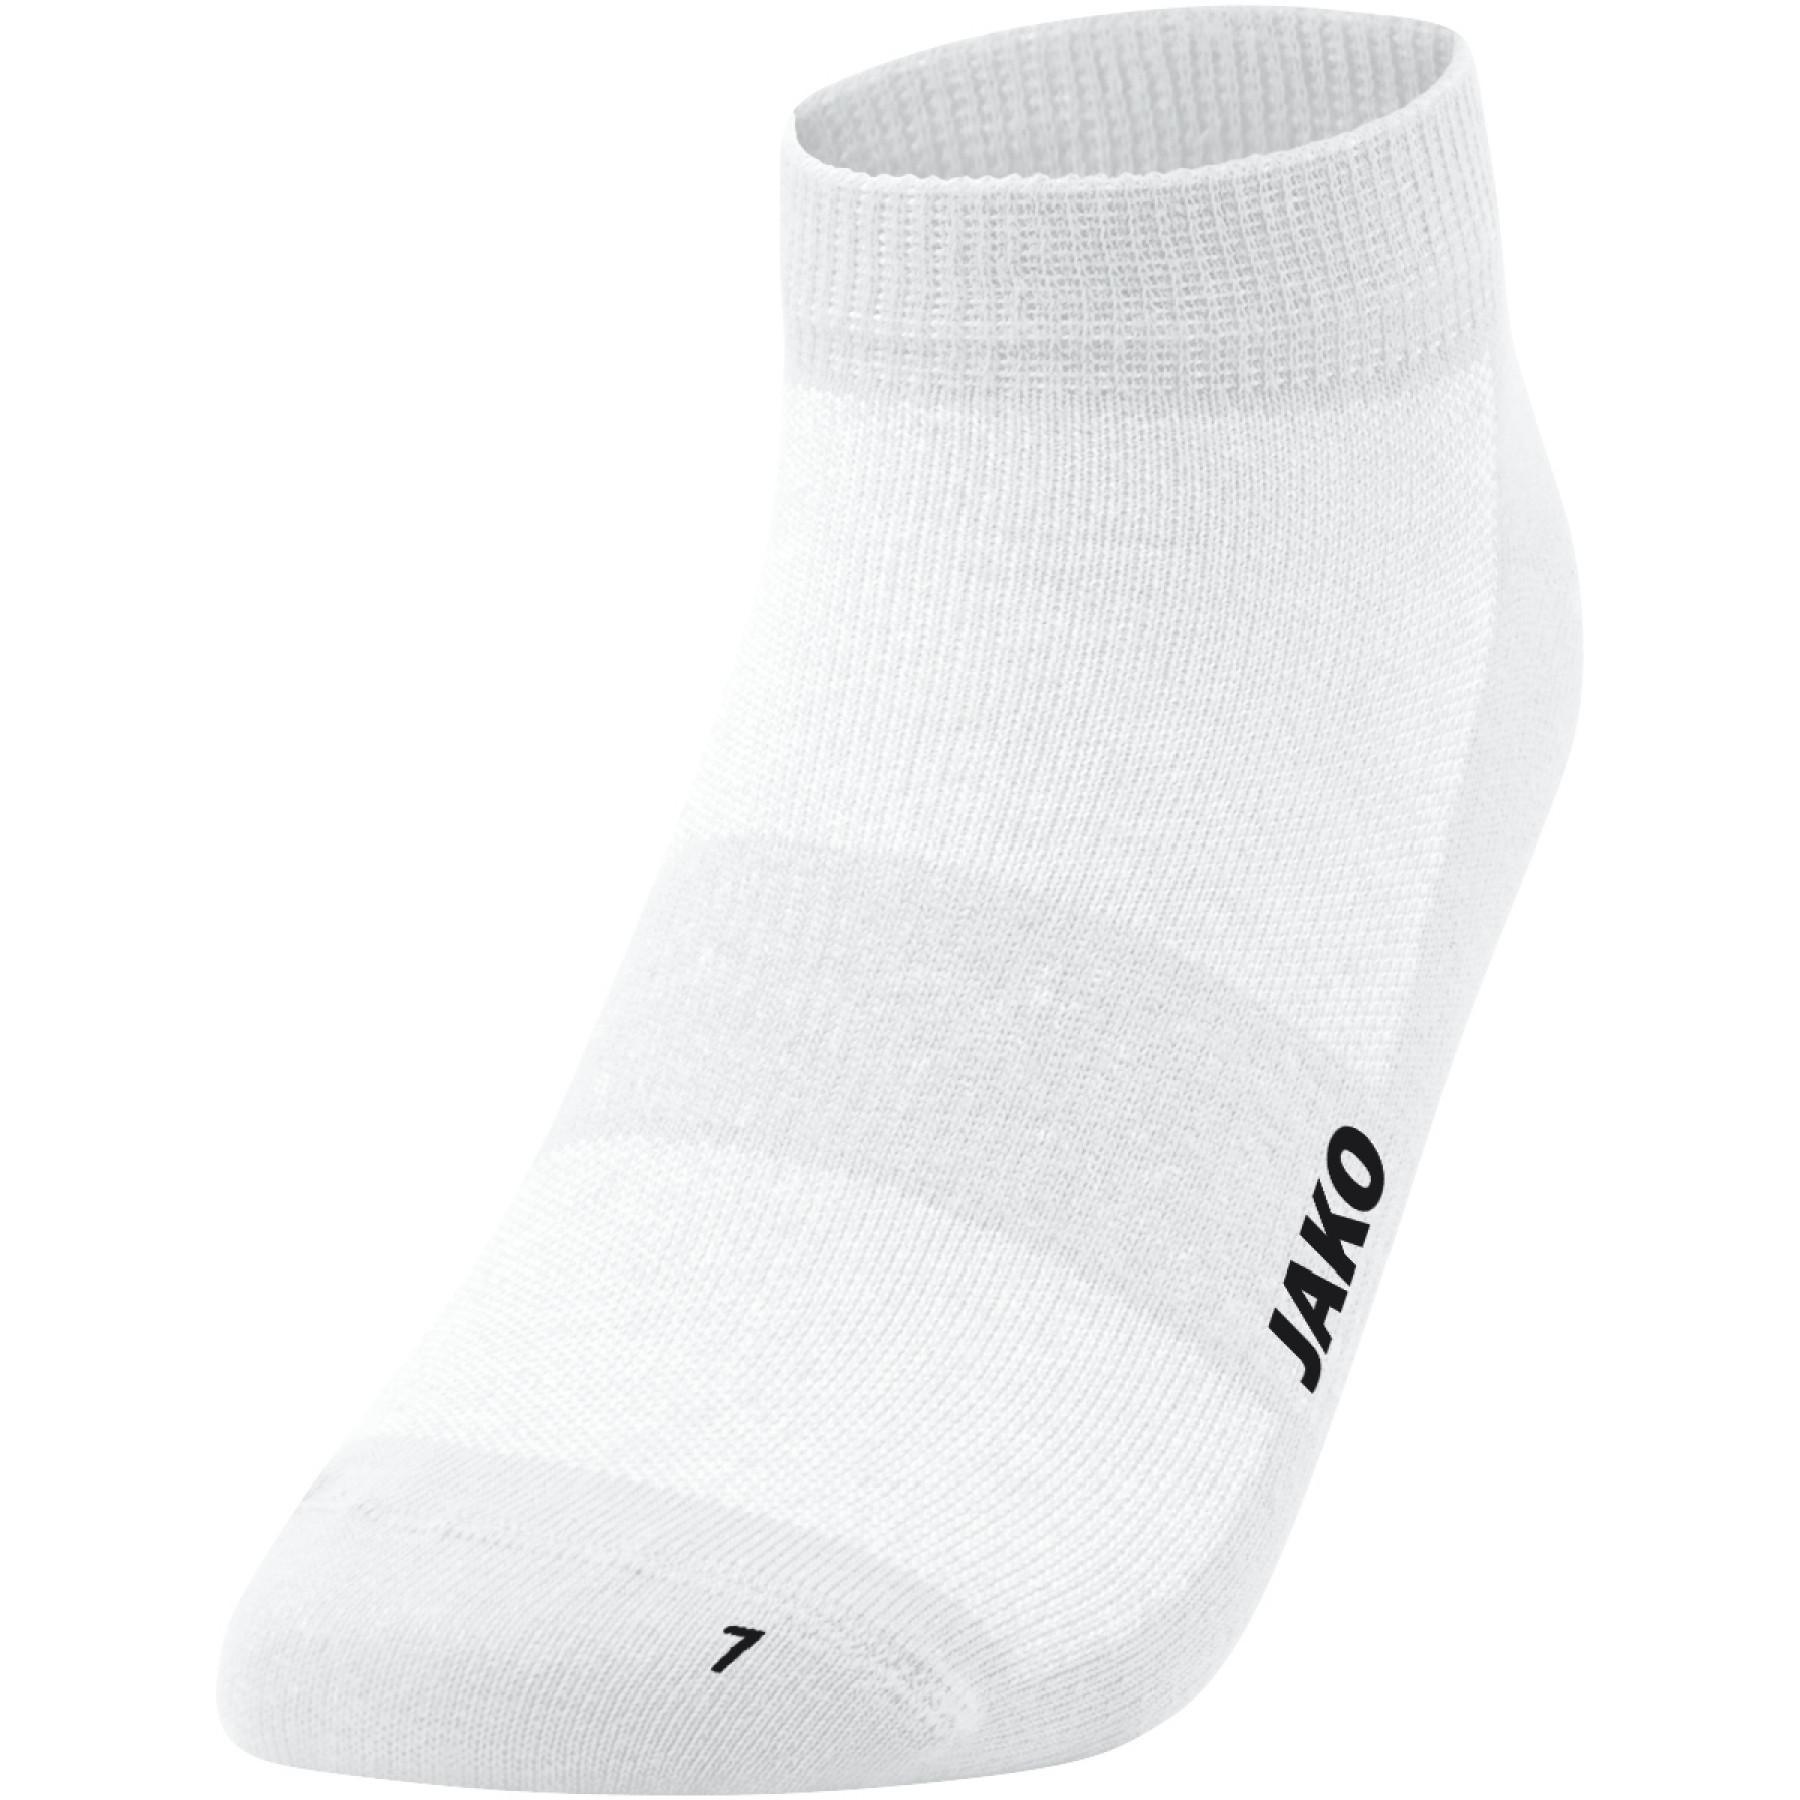 Chaussettes Jako invisibles 3-pack